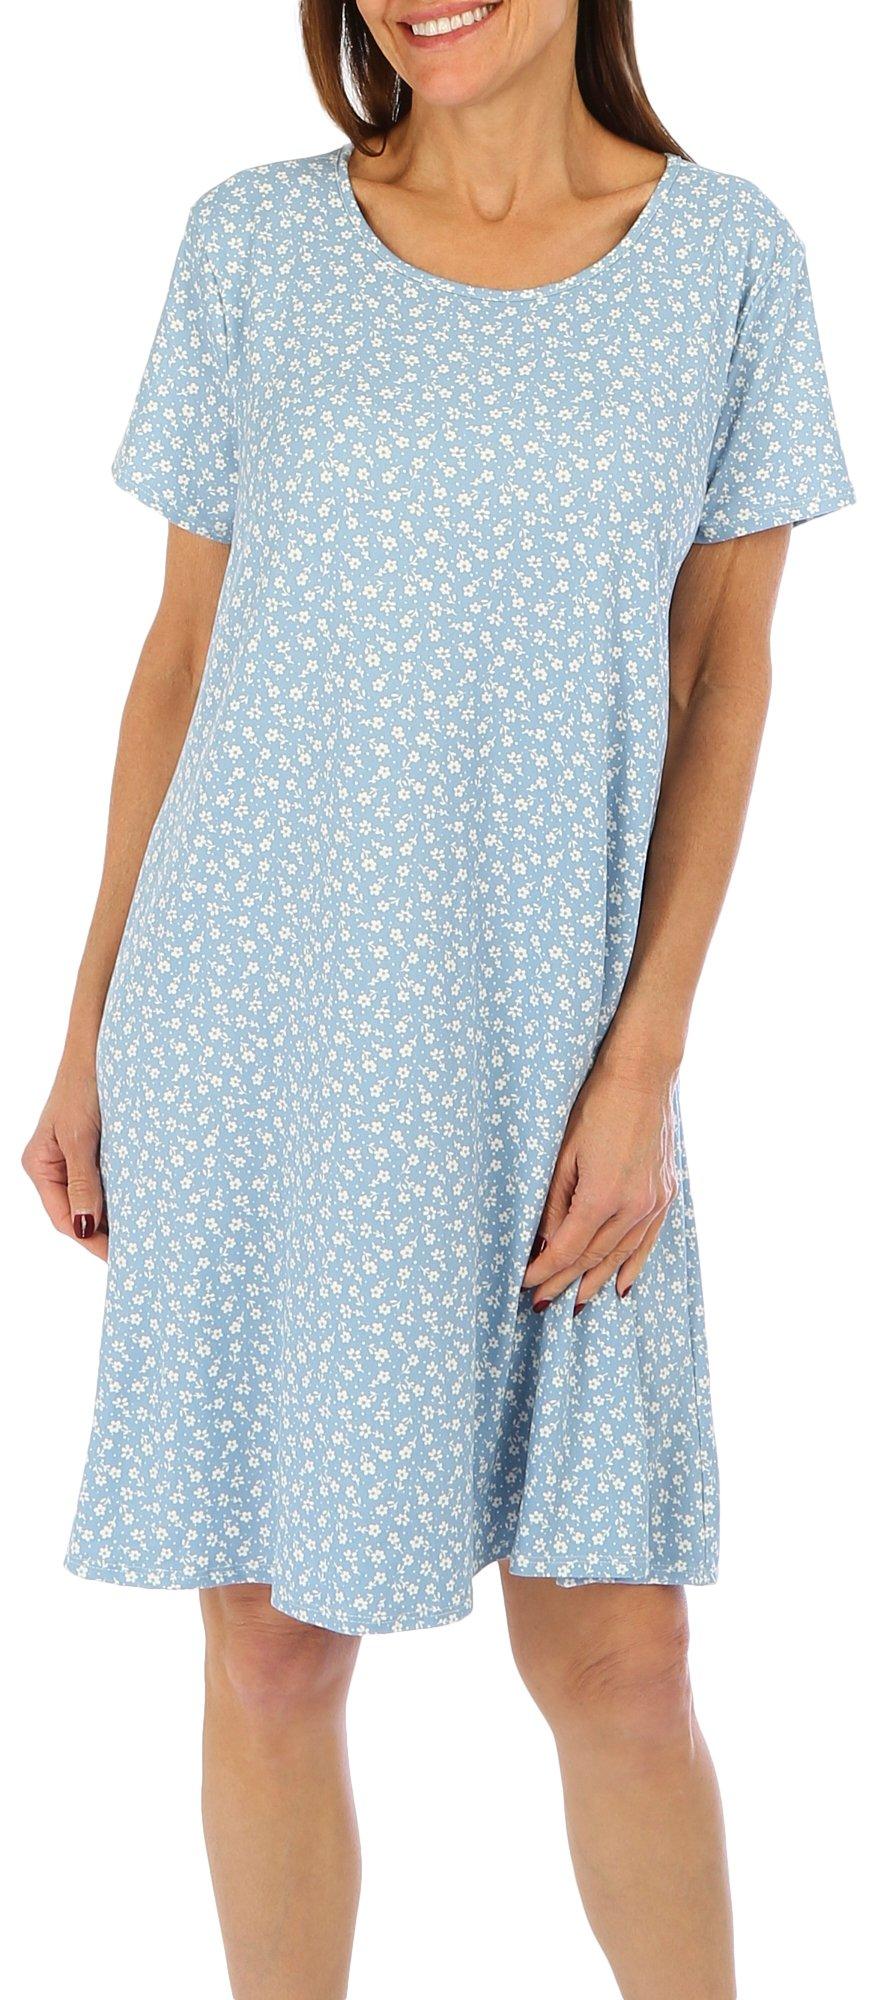 Harlow and Rose Womens Ditsy Short Sleeve Dress